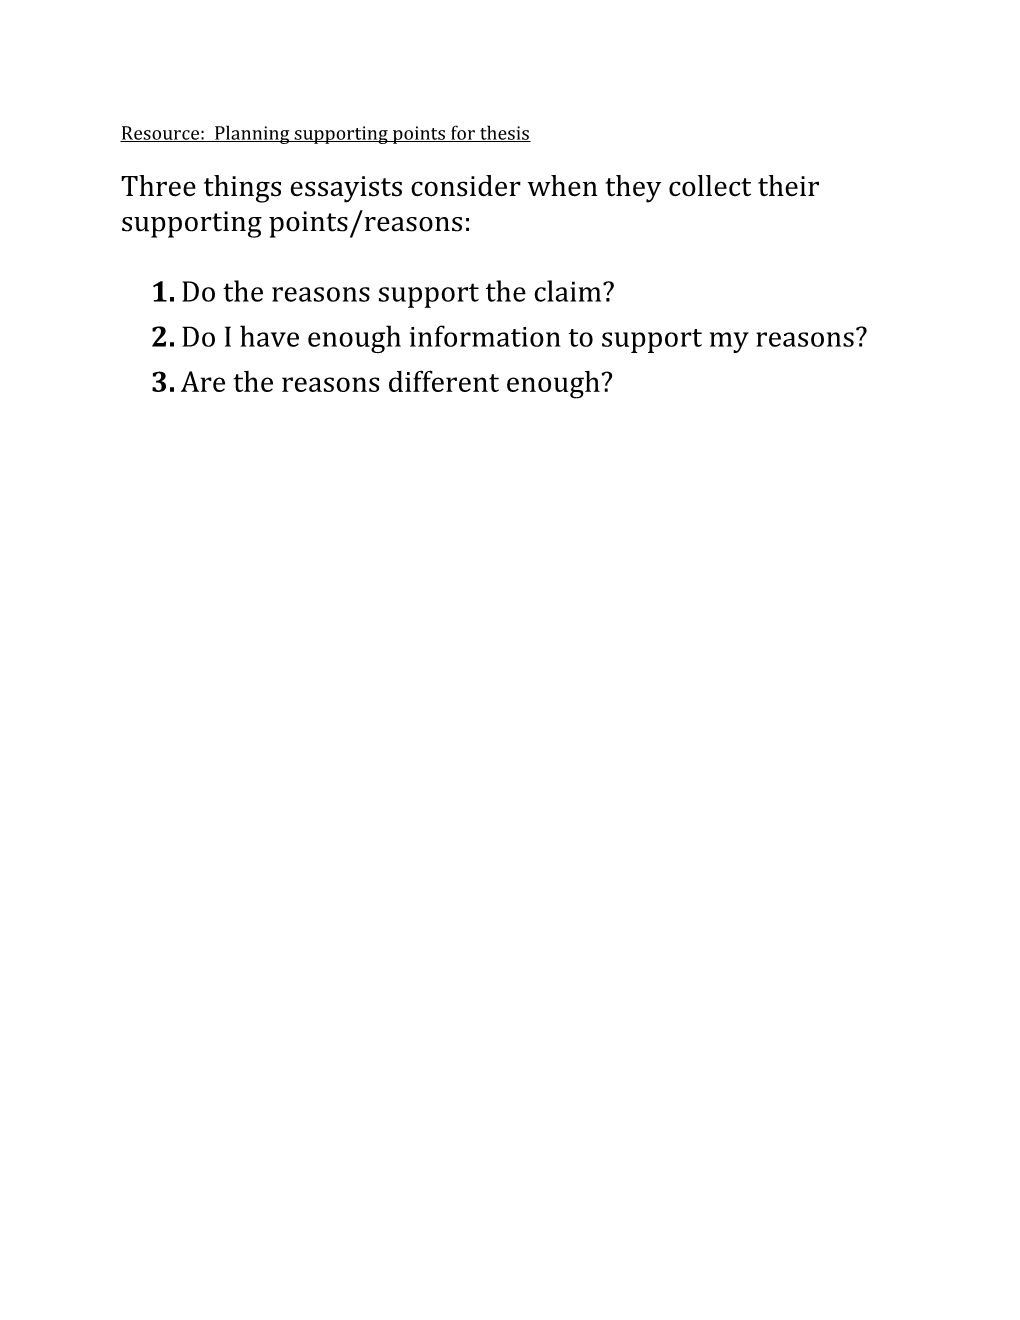 Resource: Planning Supporting Points for Thesis